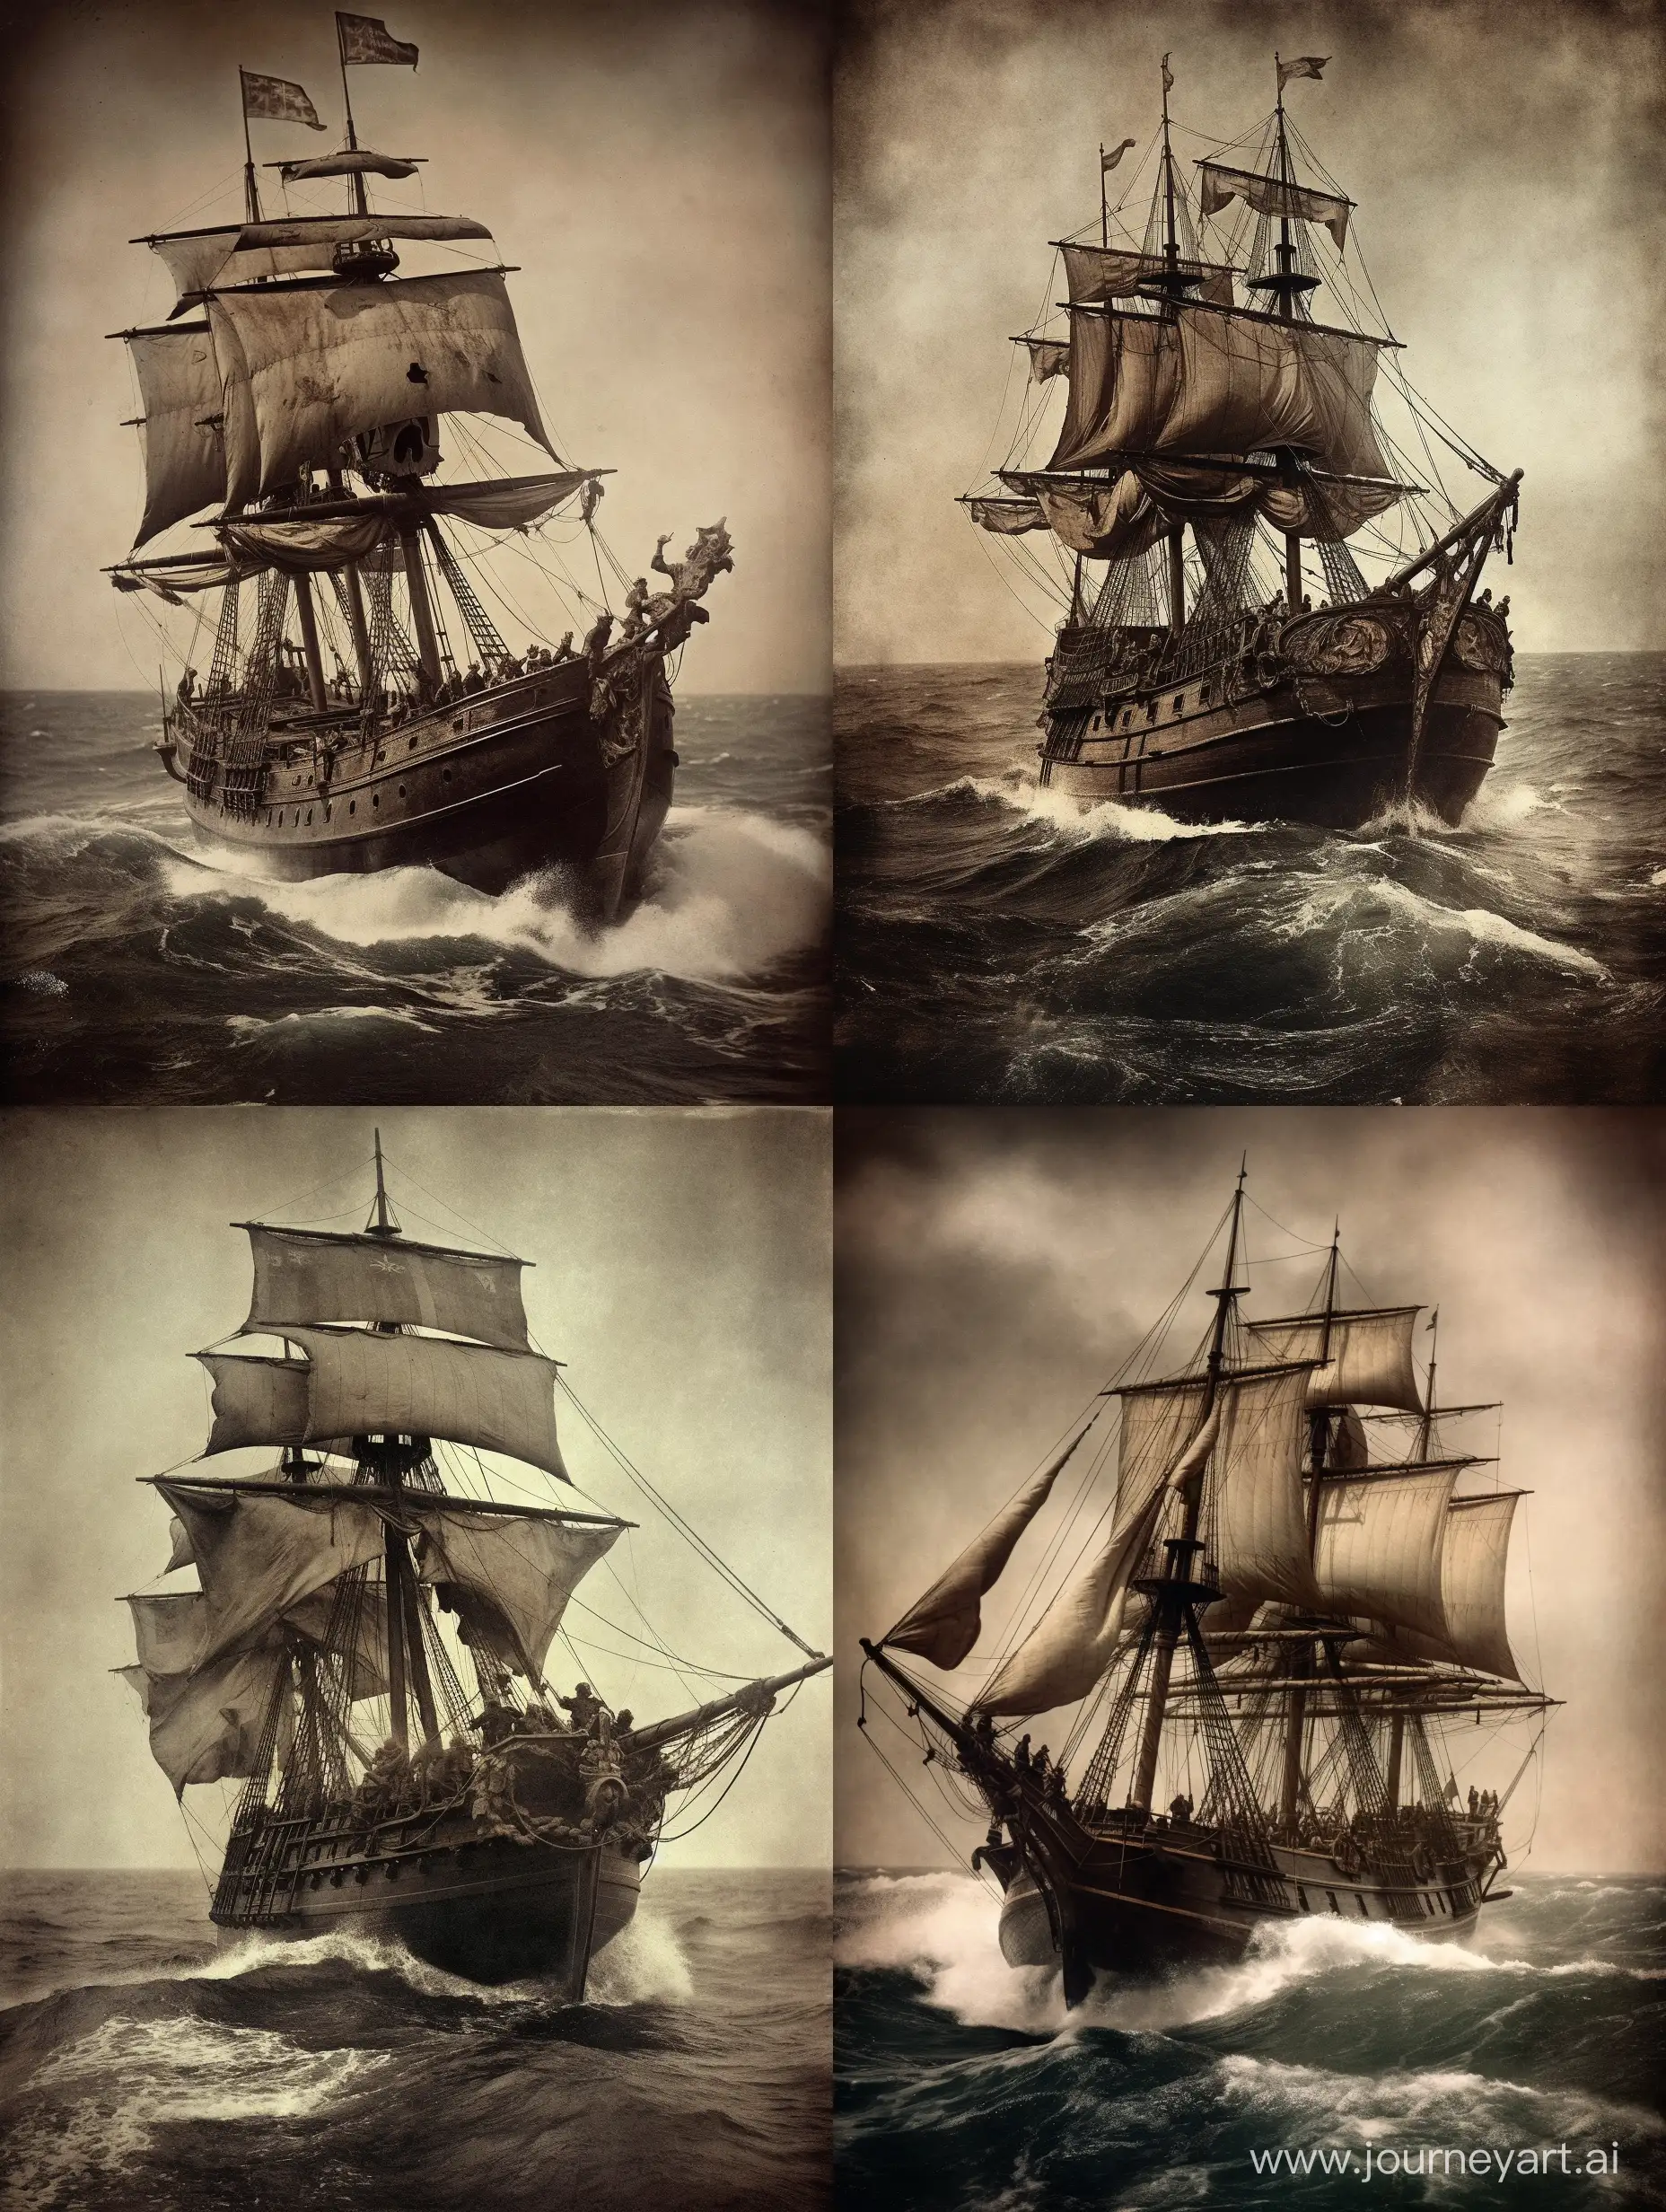 /imagine prompt: An old photograph that captures the terrifying essence of a pirate ship sailing in rough seas in 1912. The ship's dark flags and large skull on one of its sails create an ominous atmosphere, with the color temperature being vintage and sepia-toned. The lighting emphasizes the roughness of the waves and the ship's menacing features. The ship is surrounded by the vast expanse of the ocean, with the occasional seagull flying overhead. The background is slightly blurred, emphasizing the focus on the menacing pirate ship and its crew. The image has a timeless quality, reminiscent of a bygone era of seafaring adventure and danger. --ar 3:4 --s 600 --v 5 --q 2